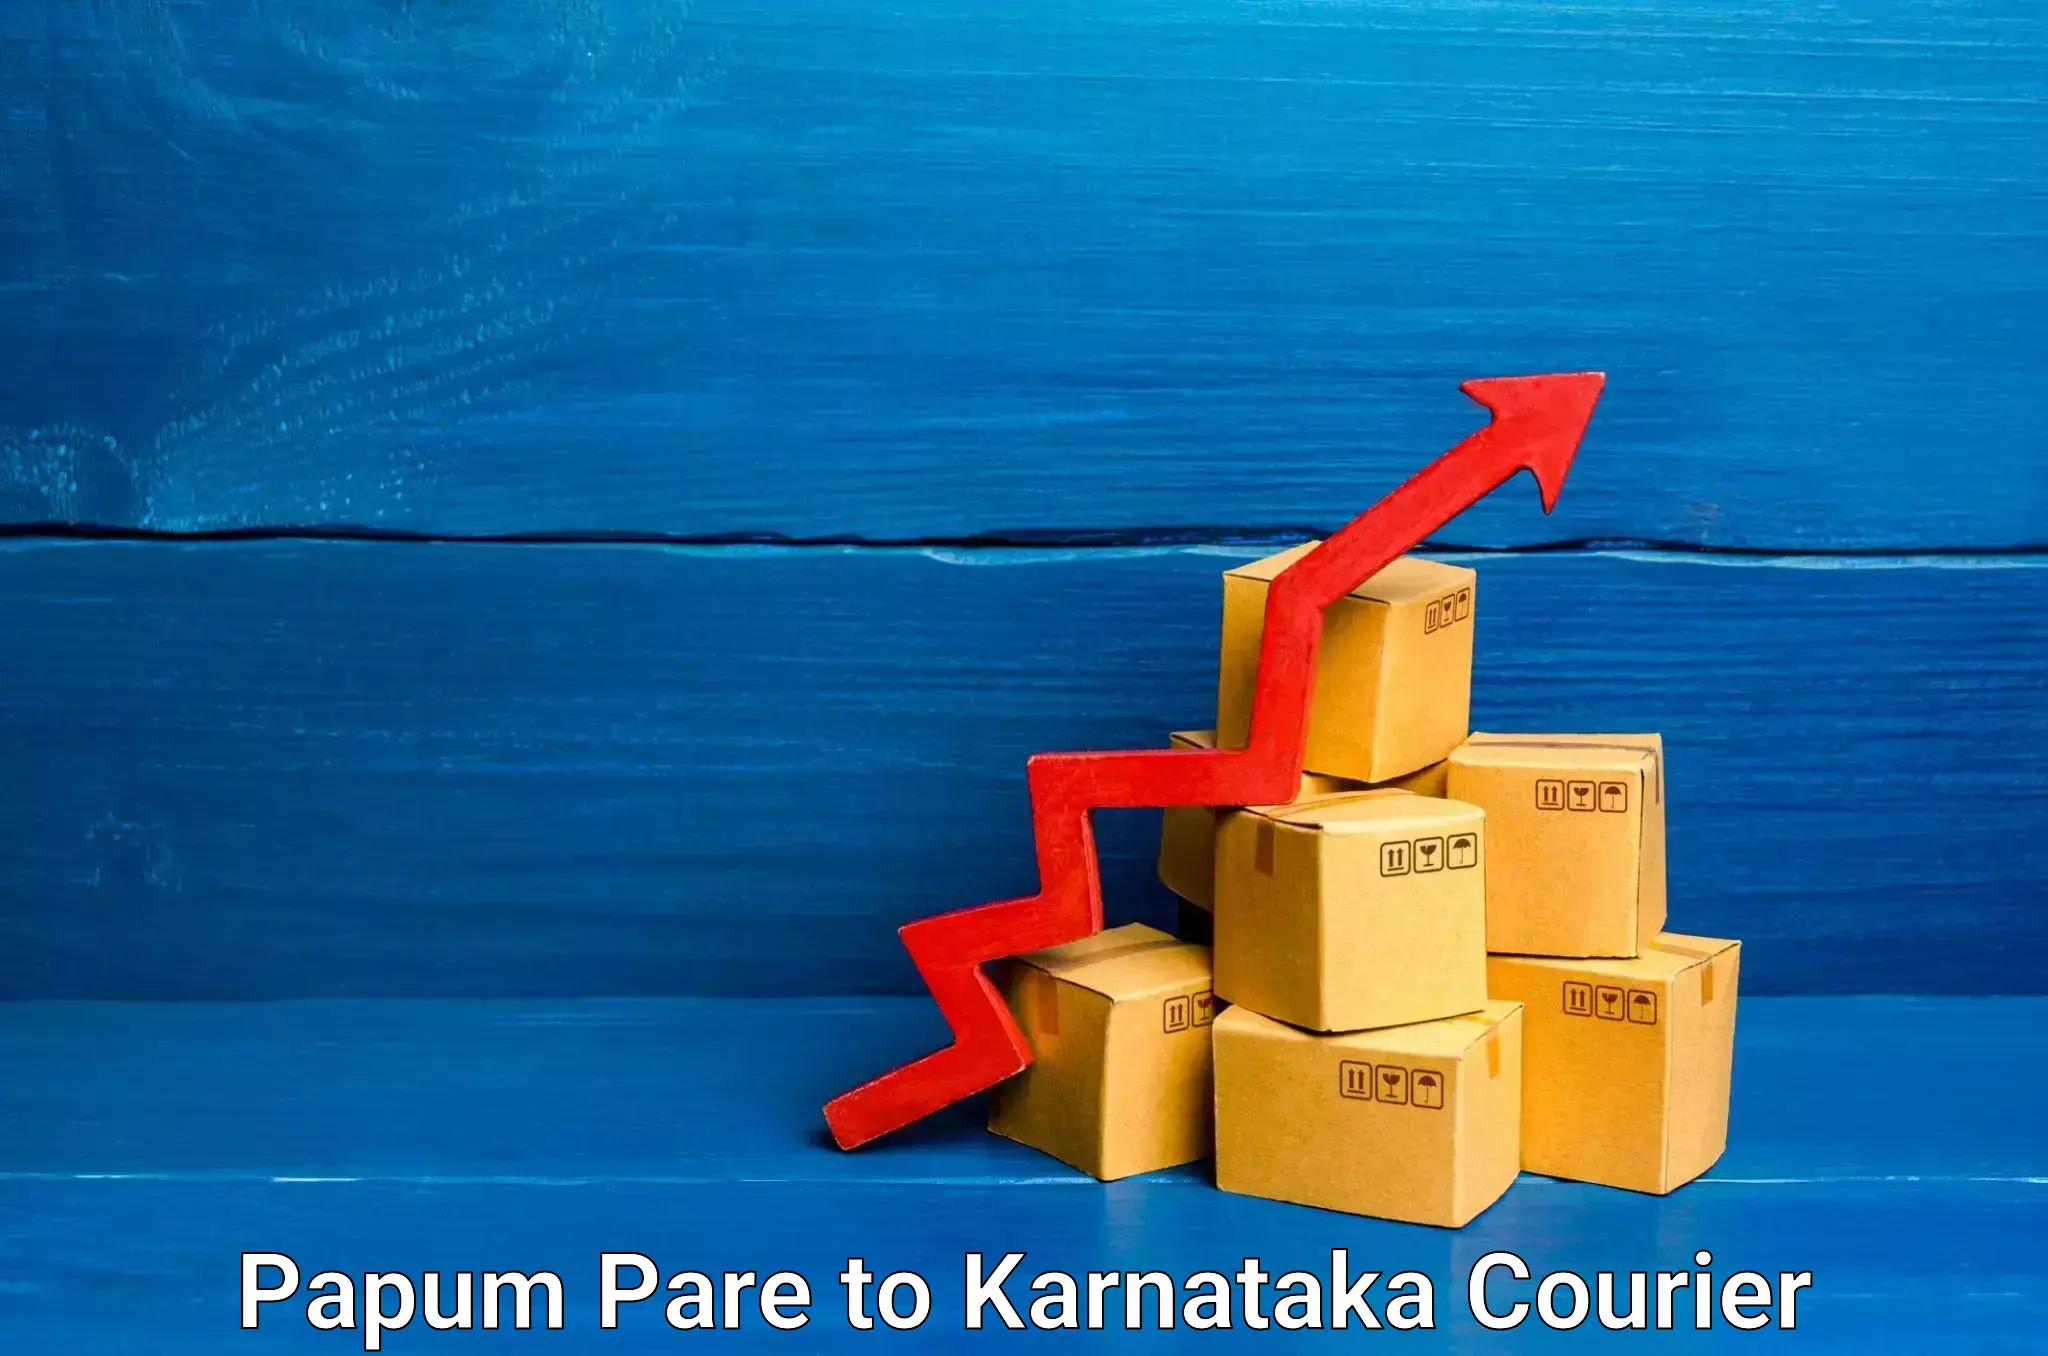 Automated shipping processes Papum Pare to Kotturu